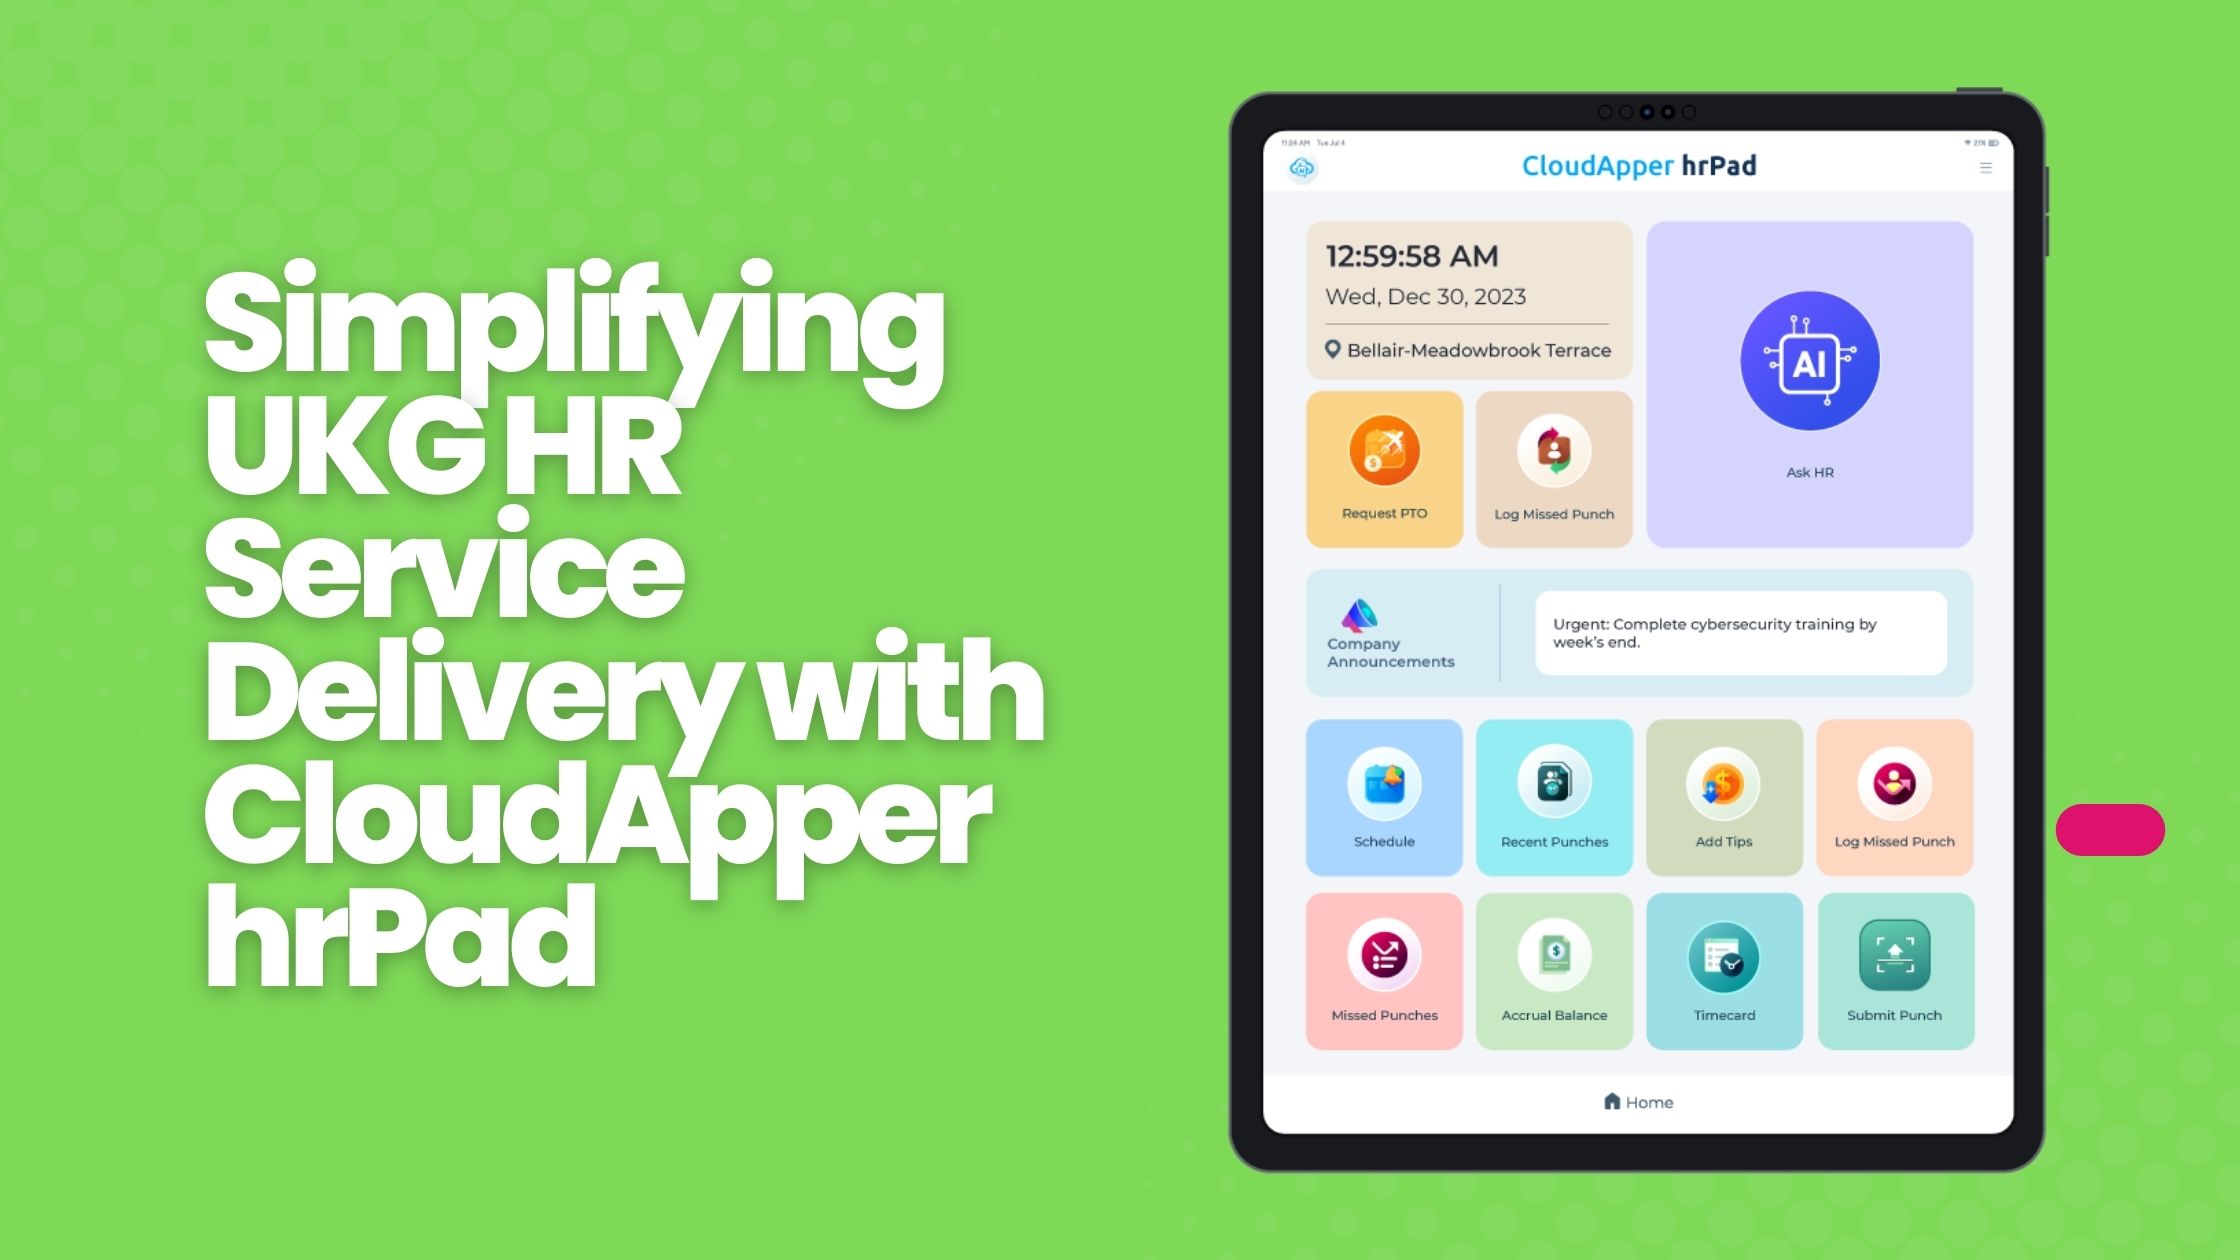 Simplifying UKG HR Service Delivery with CloudApper hrPad